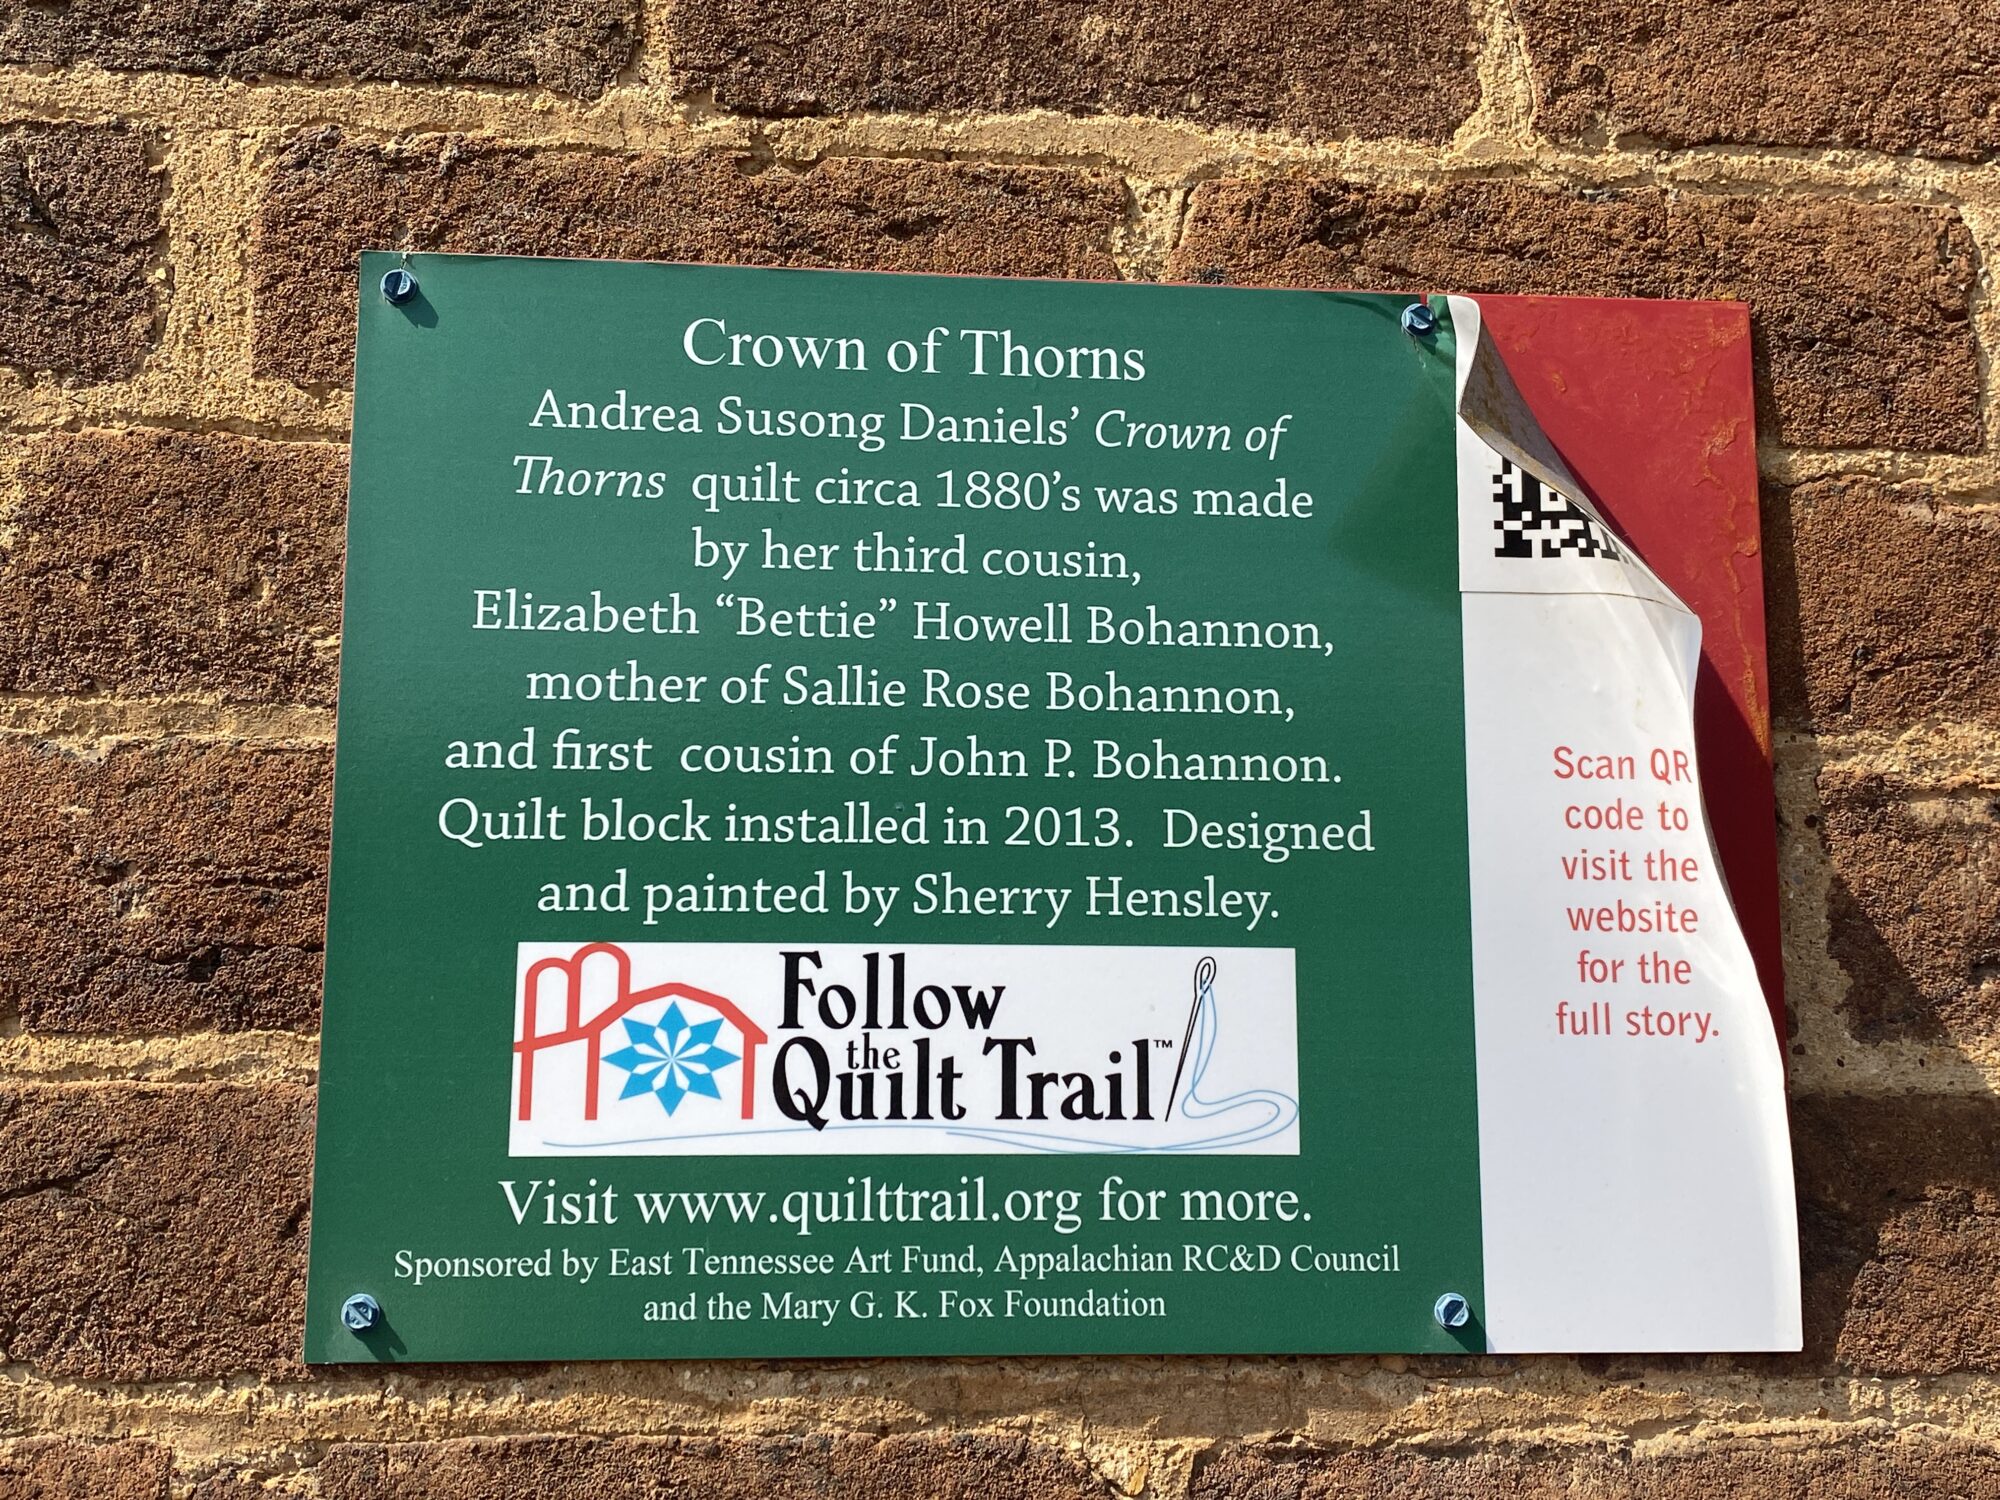 Crown of Thorns - a quilt block on the Downtown Greeneville Follow the Quilt Trail. #QuiltTrail #GreenevilleTN #CrownofThorns #QuiltBlock 